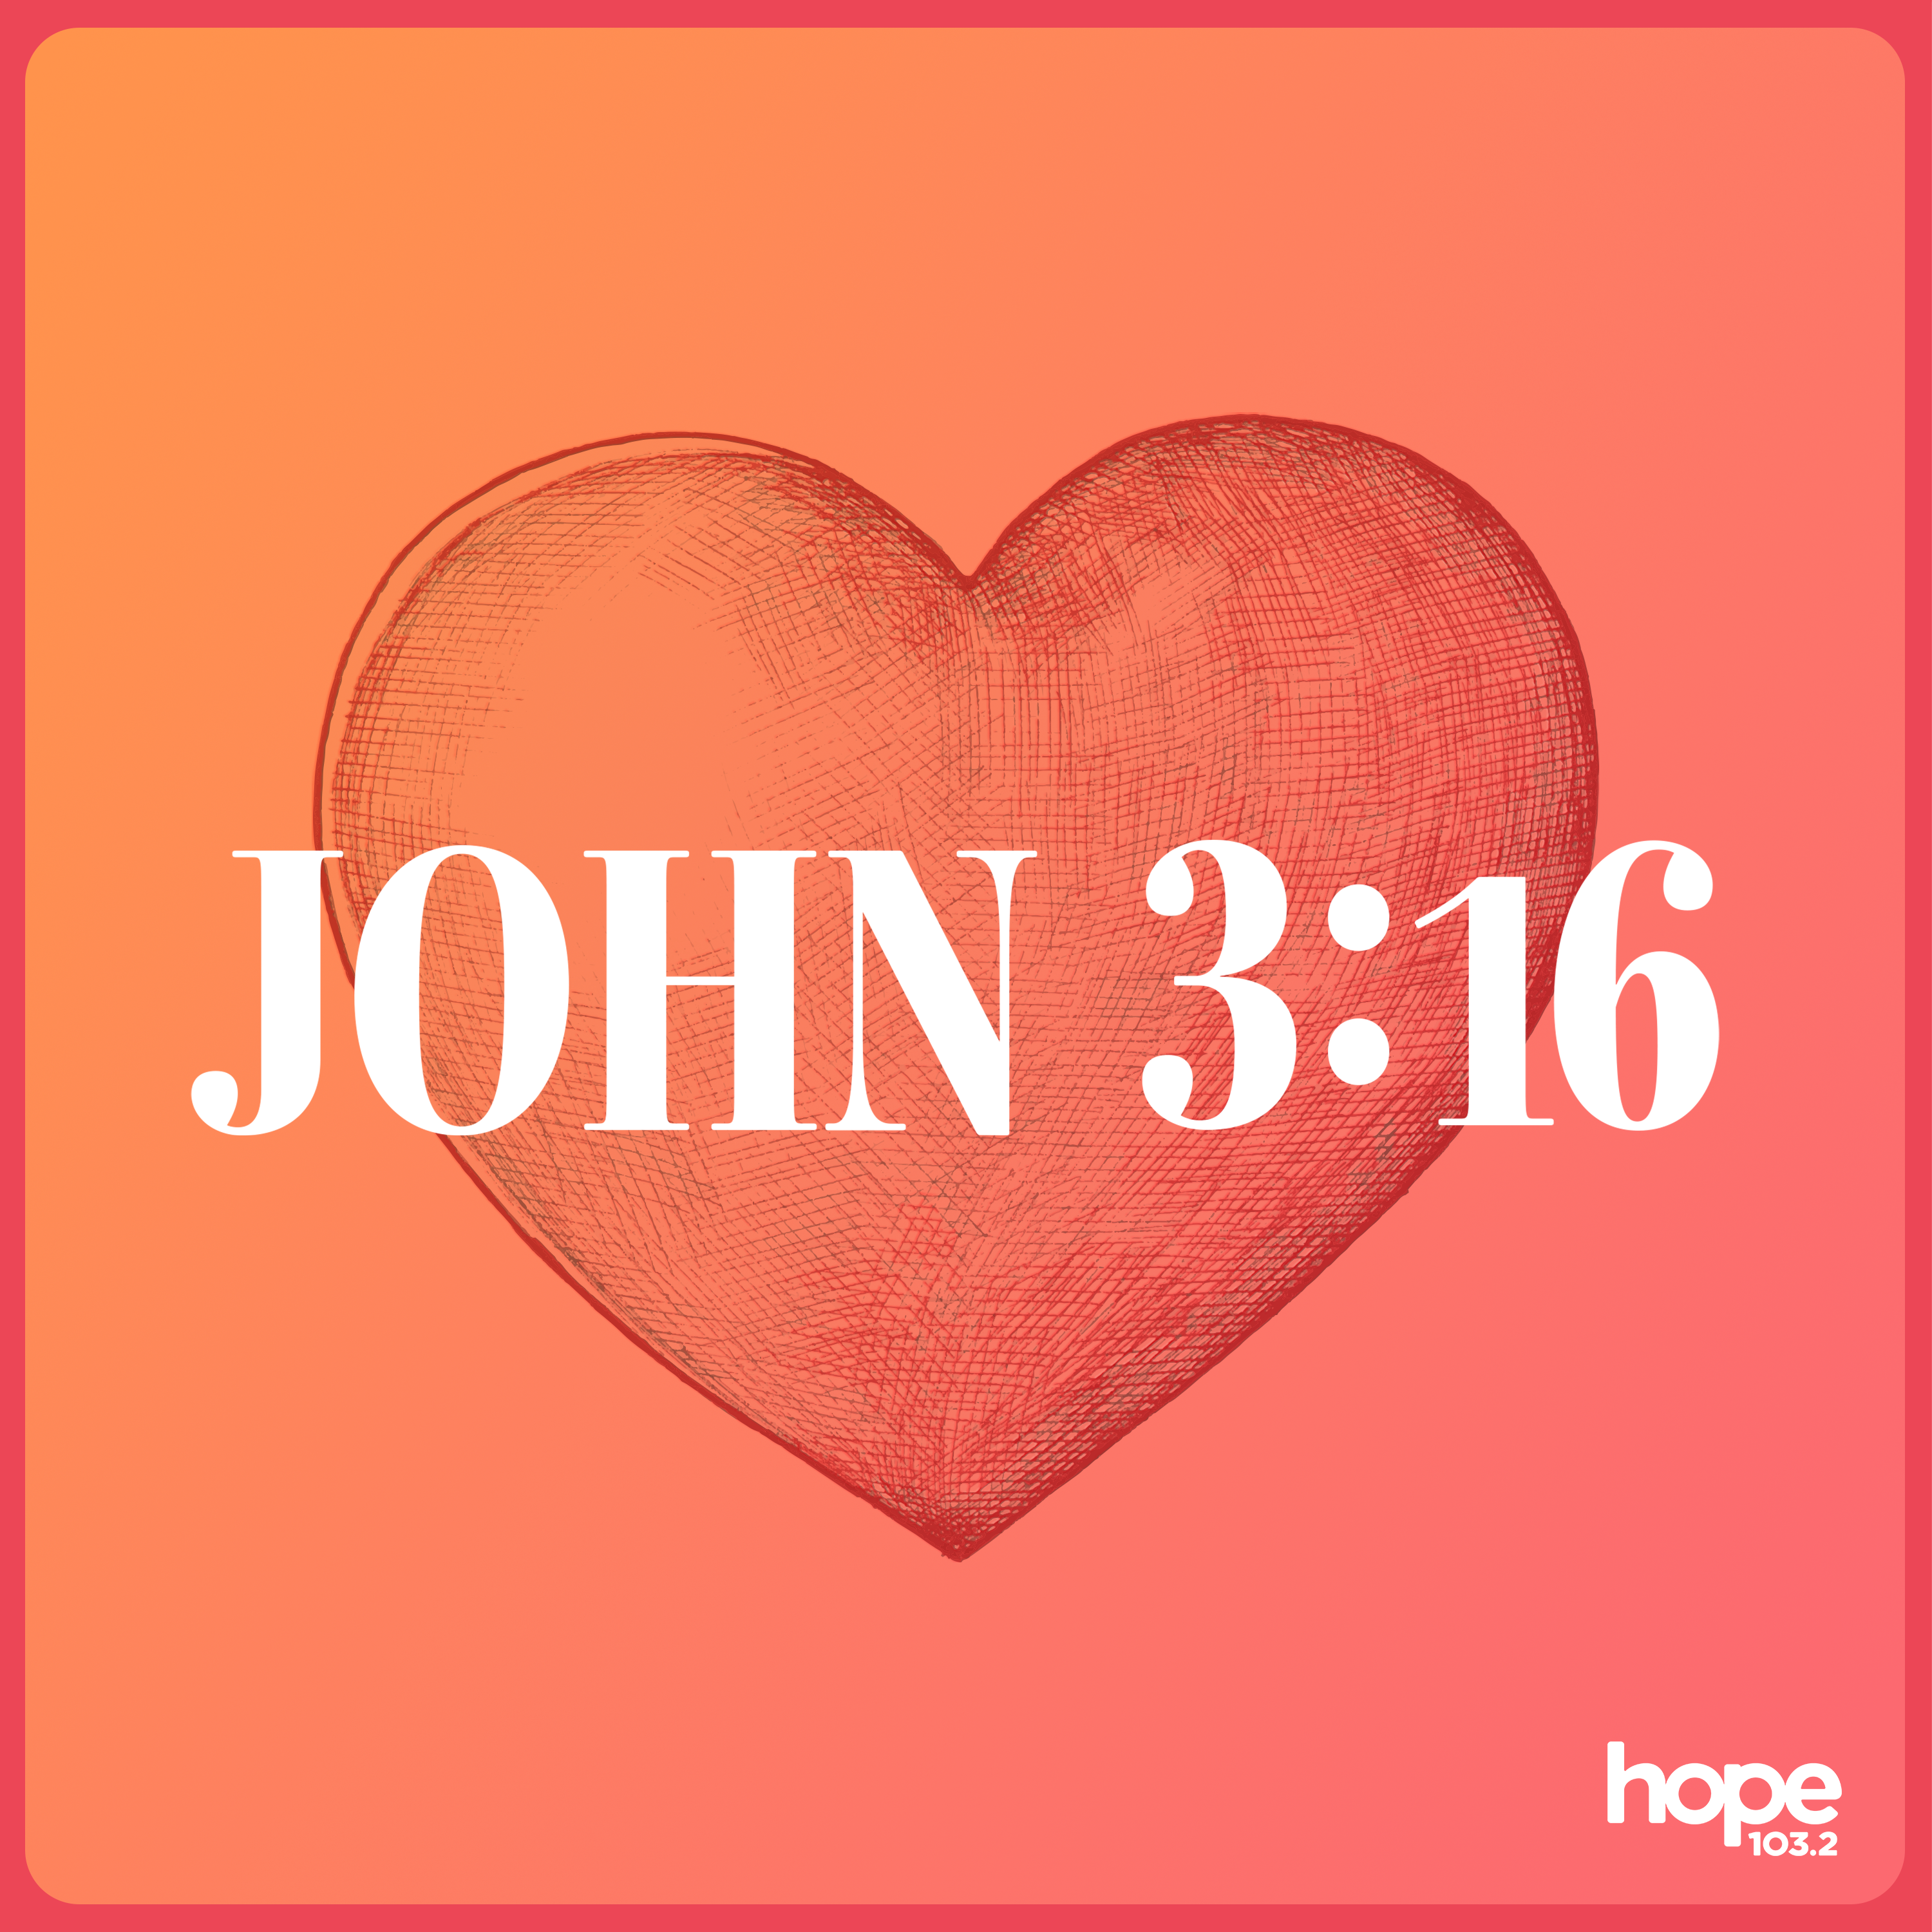 Introducing:  The John 3:16 Podcast